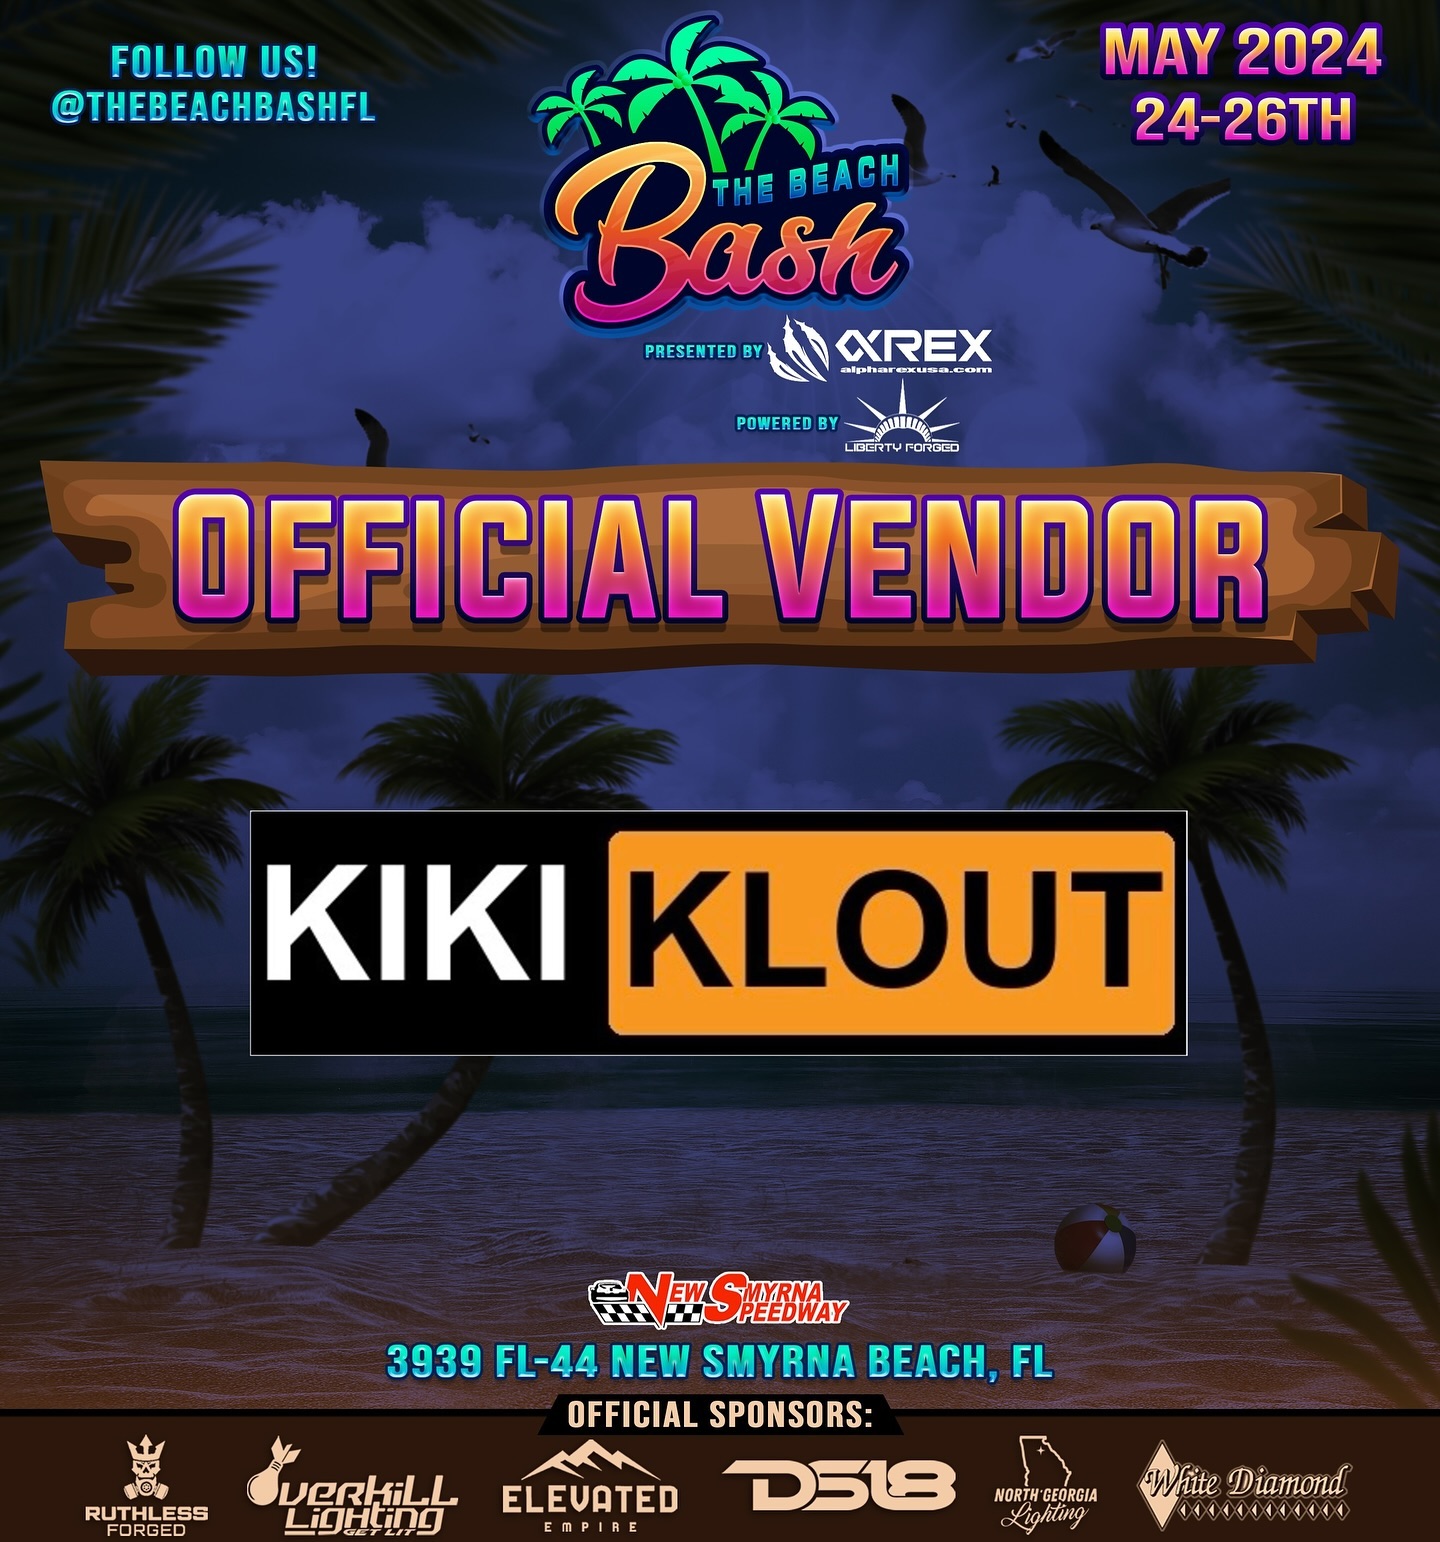 👙 WELCOME BACK @kikithesnack & FRIENDS TO TBB! 🏖️ THIS WEEKEND ONLY USE CODE “WEEKEND” FOR 15% OFF ALL REGISTRATIONS & SPECTATOR PASSES ☀️ VERY LIMITED SPACE AVAILABLE 🚨 LINK IN BIO TO GET REGISTERED🔥 SEE YALL AT THE BEACH BASH PRESENTED BY @alpharexusa POWERED BY @libertyforged ☀️ 

📸 P/C : @creativecustomsfl 
🛻 : 
@flawlesswhipz 
@elevatedempireofficial 
@overkill.lighting 
@overkill.customs 
@duck_wild_ 
@ng_lighting 
@plan_b_fab 
@ruthless_forged 
@gibsontruckworld 
@downsouthmobiledetailingllc 
@prime_shine_mobile_detailing_ 
@lion_heartz_detail 
@saltwatershinefl 
@whitediamonddetailproducts 
@jc.autocustoms 
@combatwaterfowl 
@highprofile4x4 
@axewheels 
@ttpfab 
@jaybees_journey 
@mach1media 
@creativecustomsfl 
@twistedpro_allterrain 
@twistedpro_official 
@czsmods 
@2turntempire 
@ruthless_forged 
@twothreedesigns 
@florida_grind 
@jinright92_ 
@libertyforged 
@dade_truckin 
@smalltown_getdown 
@dv8dz9 
@raizedlftdco 
@fatboipotatoes 
@kg1forged 
@lifted_rippers 
@shifted_industries 
@bigshotindustries 
@17_skynet
@theskynetteam 
@diesels_and_dirtbags 
@thatsranchyboutique 
@smg__apparel 
@skoop_smg 
@nikki_smg 
@teambillet_officialpage 
@teambilletfl 
@forgedleds 
@ds18audio 
@m2_audioandaccessories 
@wolfcustomsllc 
@drippinwetdetailingsupplies 
@orioncaraudioofficial 
@kikithesnack 
- - - - - - - -

#truck #trucks #truckshow #ford #liftedlifestyle #liftedlife #truckshows #liftedtrucks #lifted #florida #daytona #deland #orlando #lovefl #daytonabeach #fl #liftedtruckshow #newsmyrnabeach #newsmyrnabeachfl #newsmyrnaspeedway